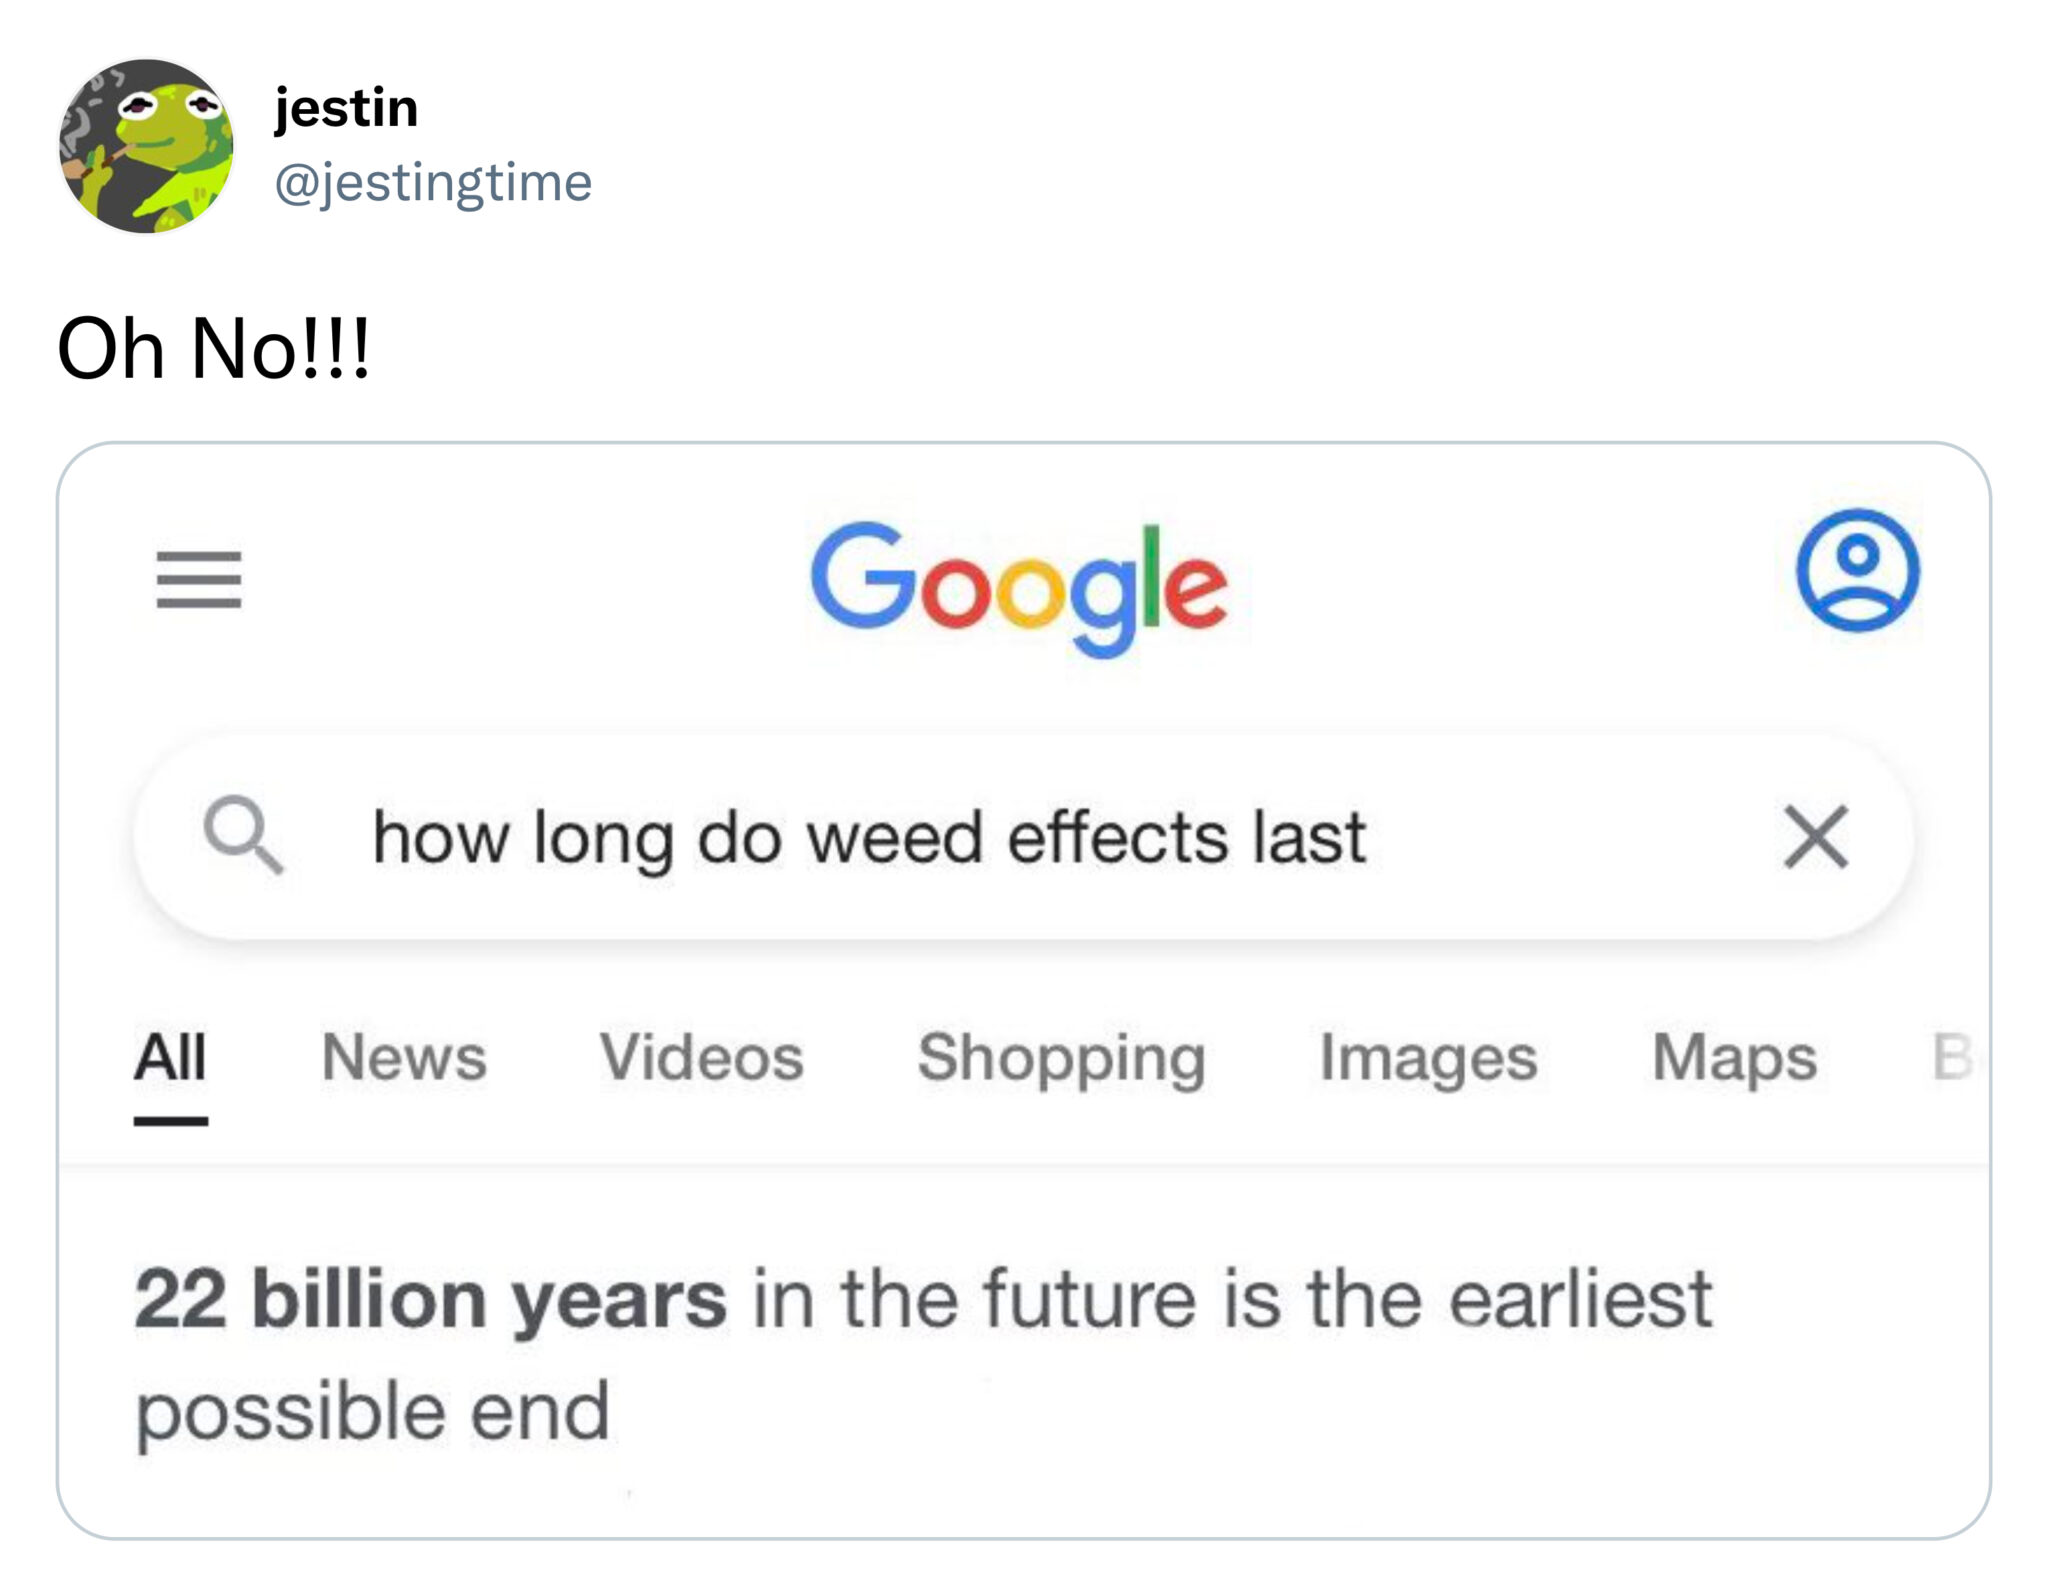 funny tweets and memes -  uranium calories meme - jestin Oh No!!! ||| Google Q how long do weed effects last All News Videos Shopping Images Maps 22 billion years in the future is the earliest possible end O 60 X B